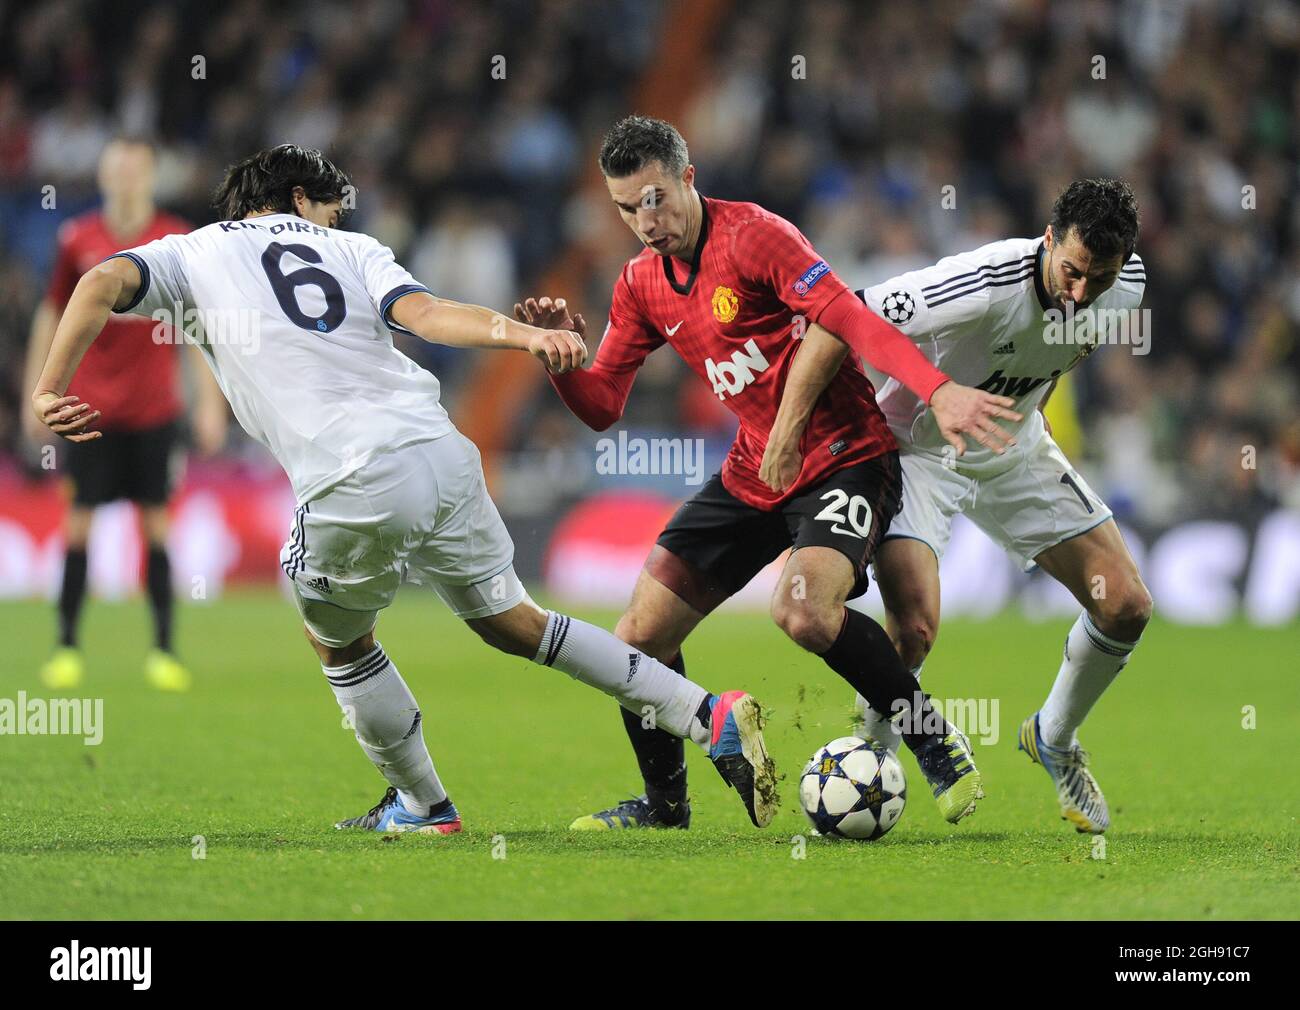 Robin van Persie of Manchester United tussled with Sami Khedira of Real Madrid and Alvaro Arbeloa of Real Madrid during the UEFA Champions League First Knockout Round of 16, 1st leg match between Real Madrid and Manchester Utd at Santiago Bernabeu Stadium in Madrid, Spain on 13th February 2013 Stock Photo